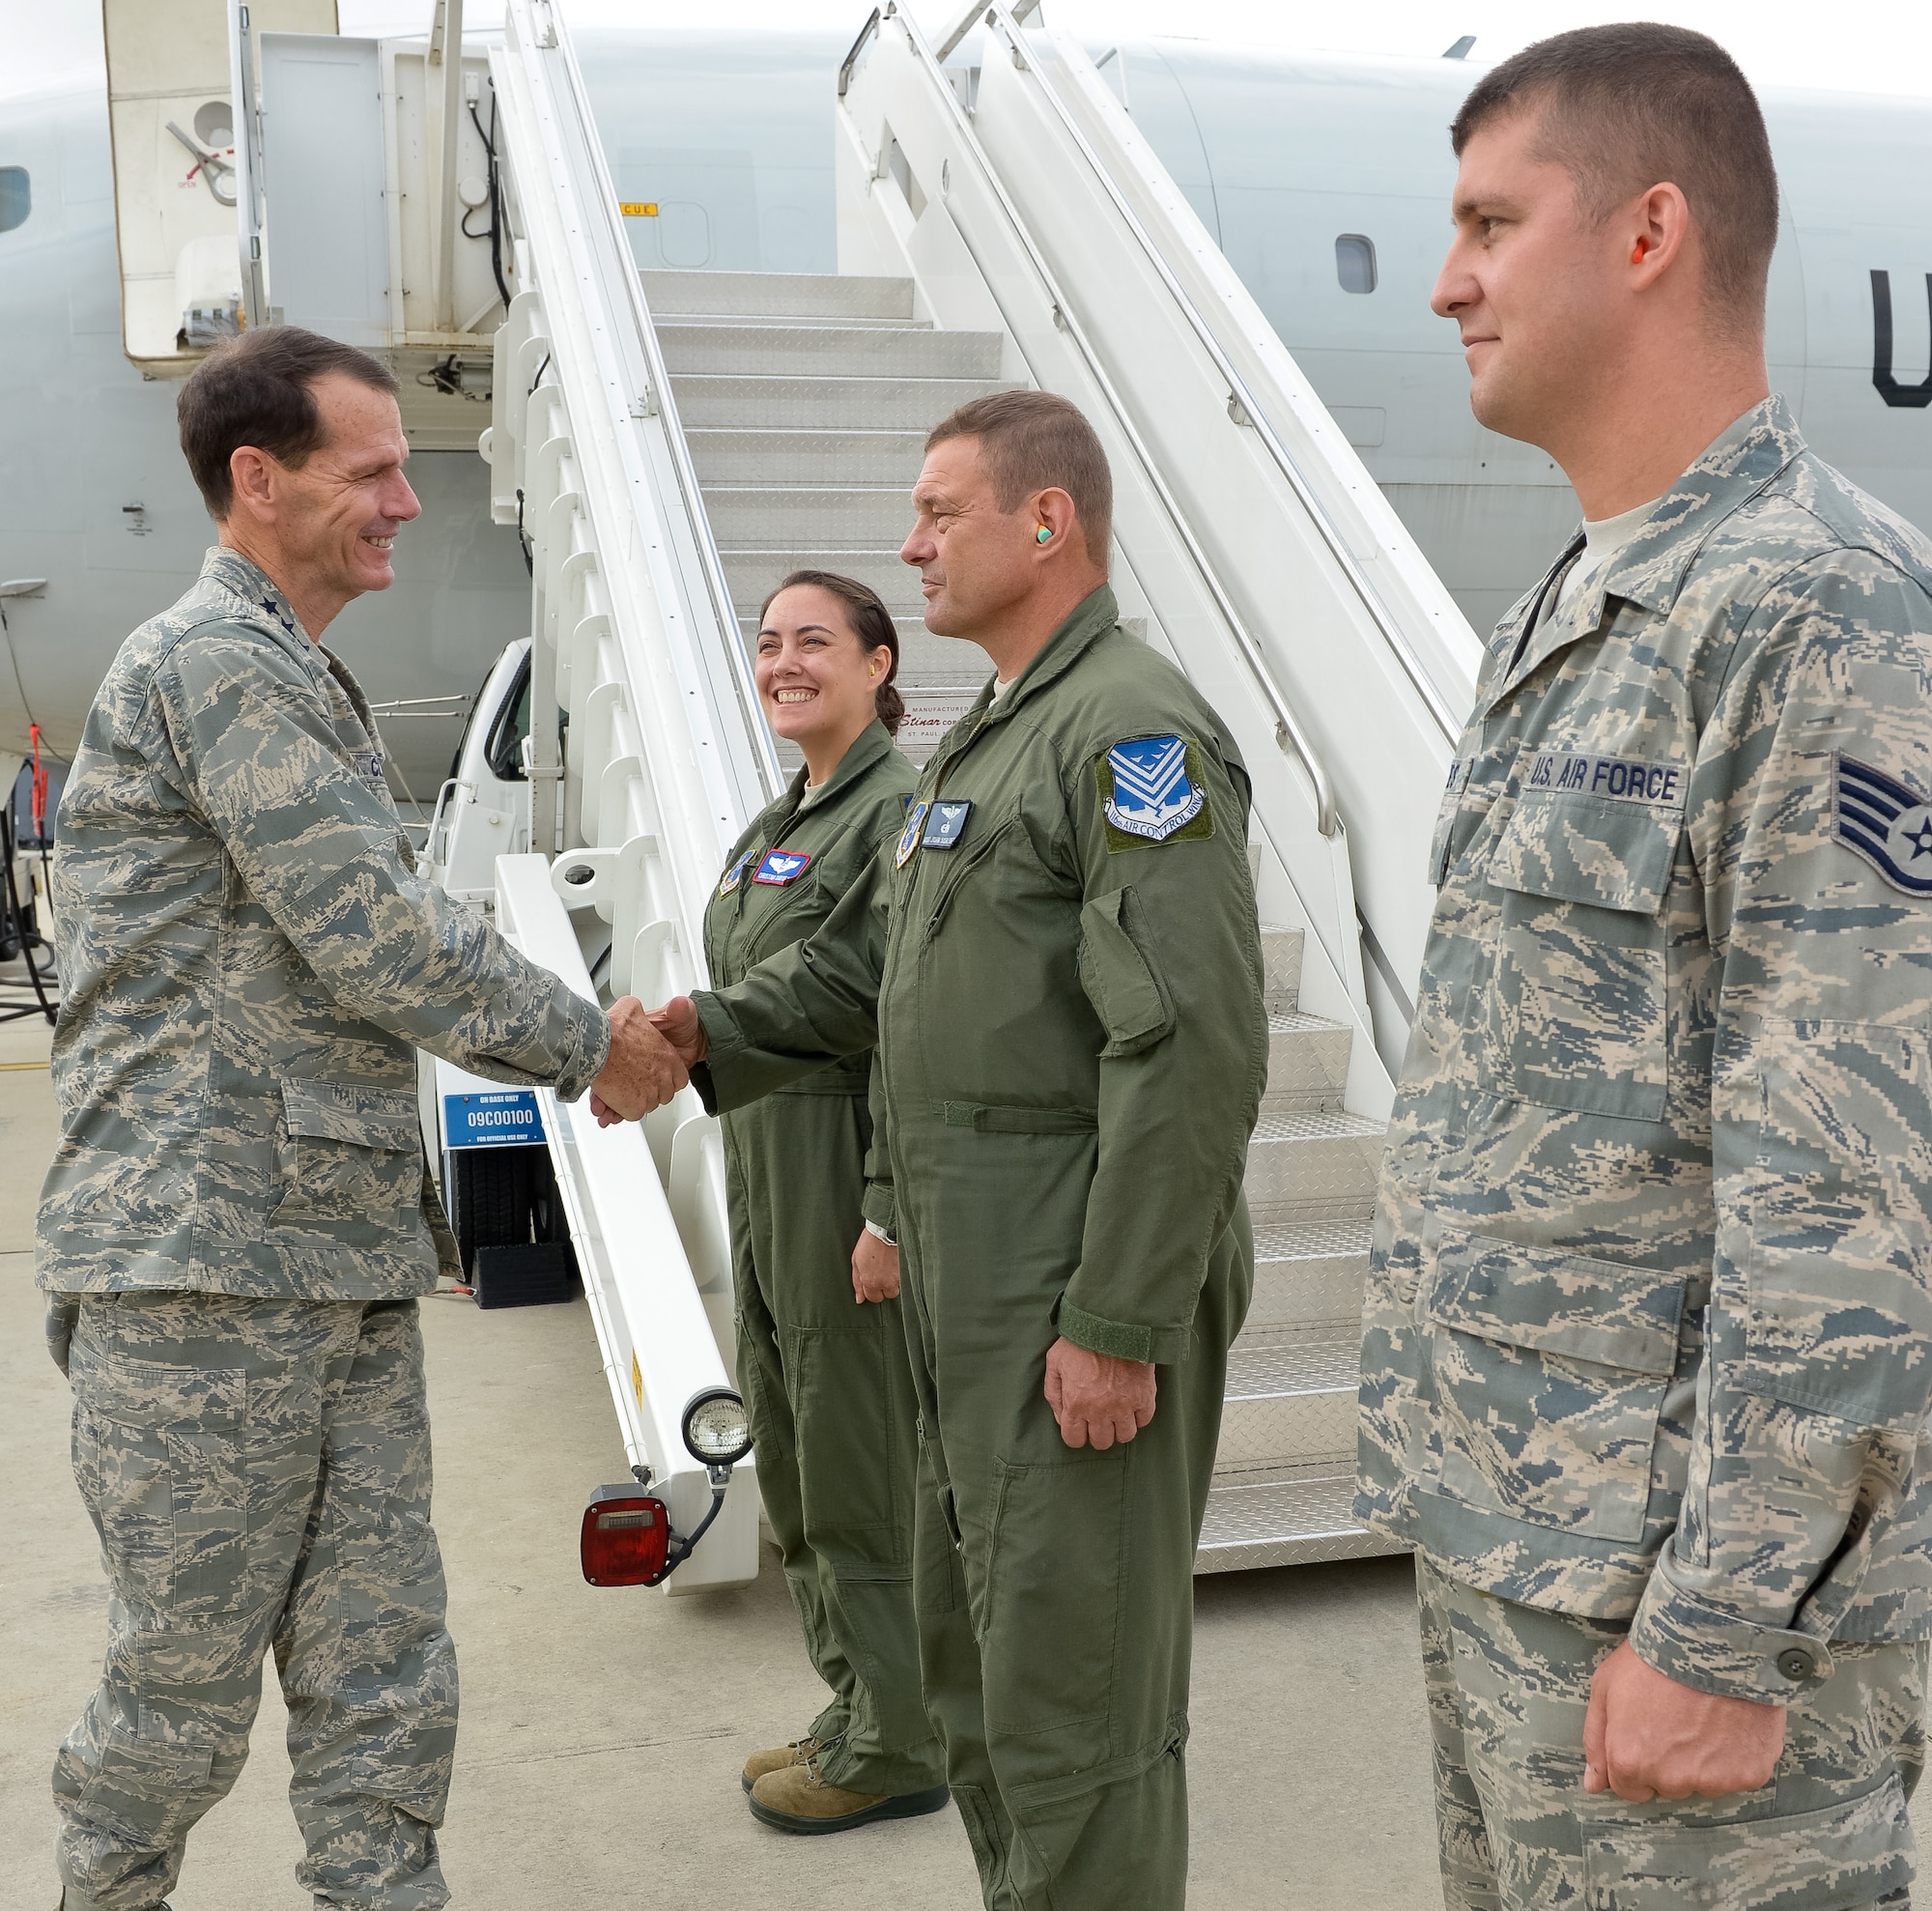 Lt. Gen. Stanley E. Clarke III, director of the Air National Guard, greets Airmen from Team JSTARS during an orientation visit to the 116th and 461st Air Control Wings at Robins Air Force Base, Ga., July 3, 2013.  The visit is Clarke's first to Team JSTARS since becoming director of the Air National Guard.  During the visit Clarke received a mission orientation, toured the E-8C and visited Airmen and Soldiers throughout the unit. (U.S. Air National Guard photo by Master Sgt. Roger Parsons/Released)